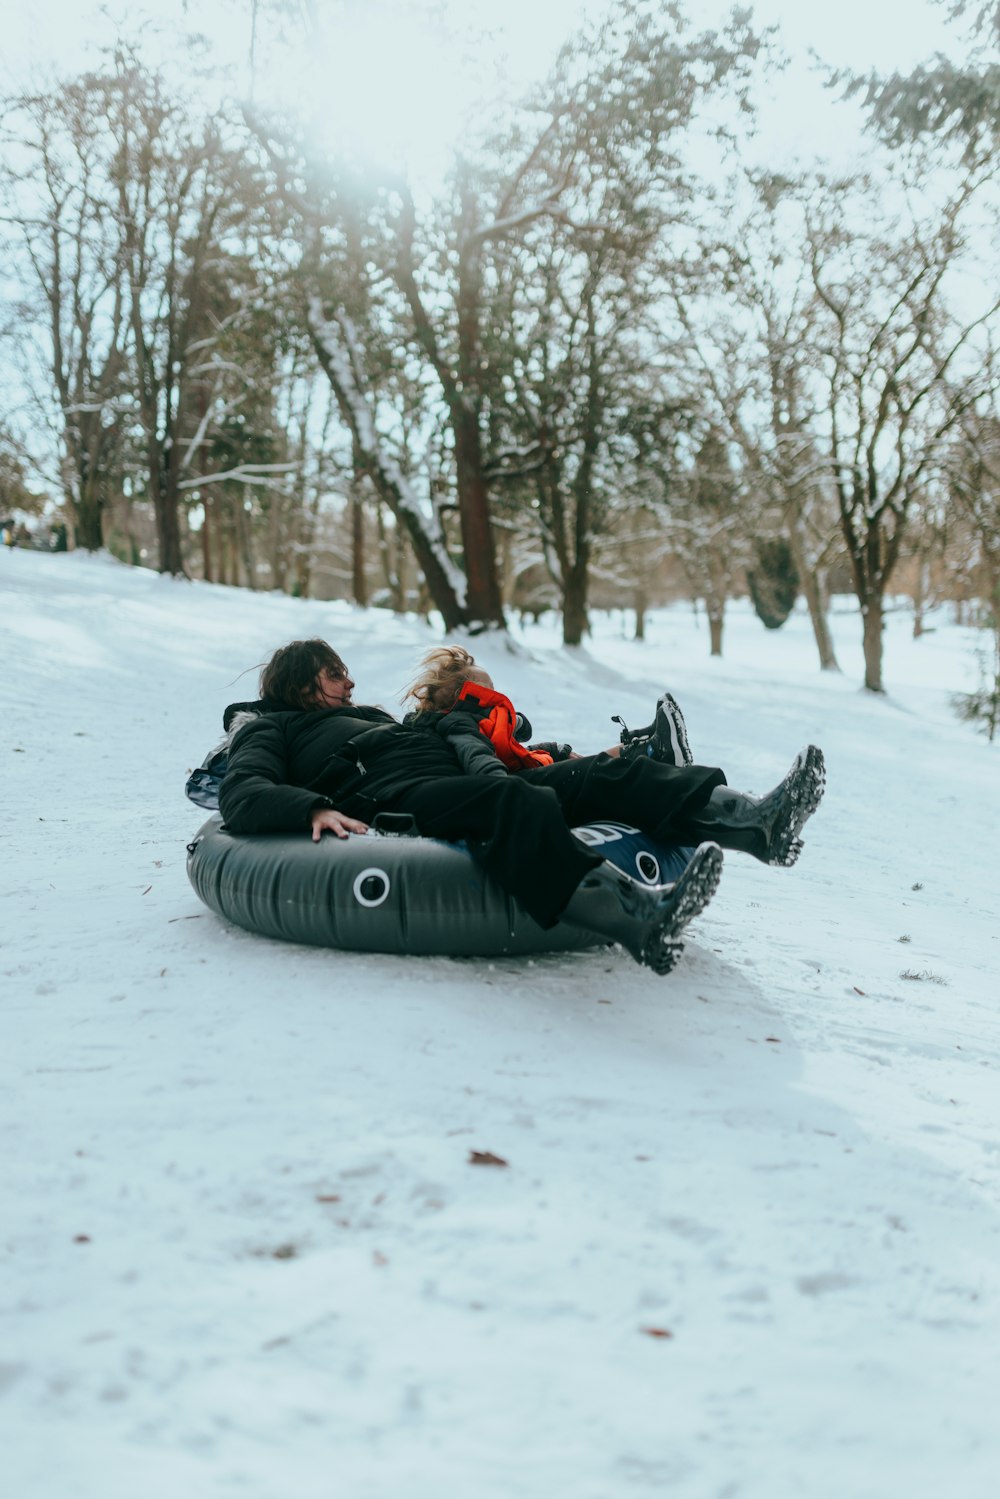 a man and a woman are sledding down a hill